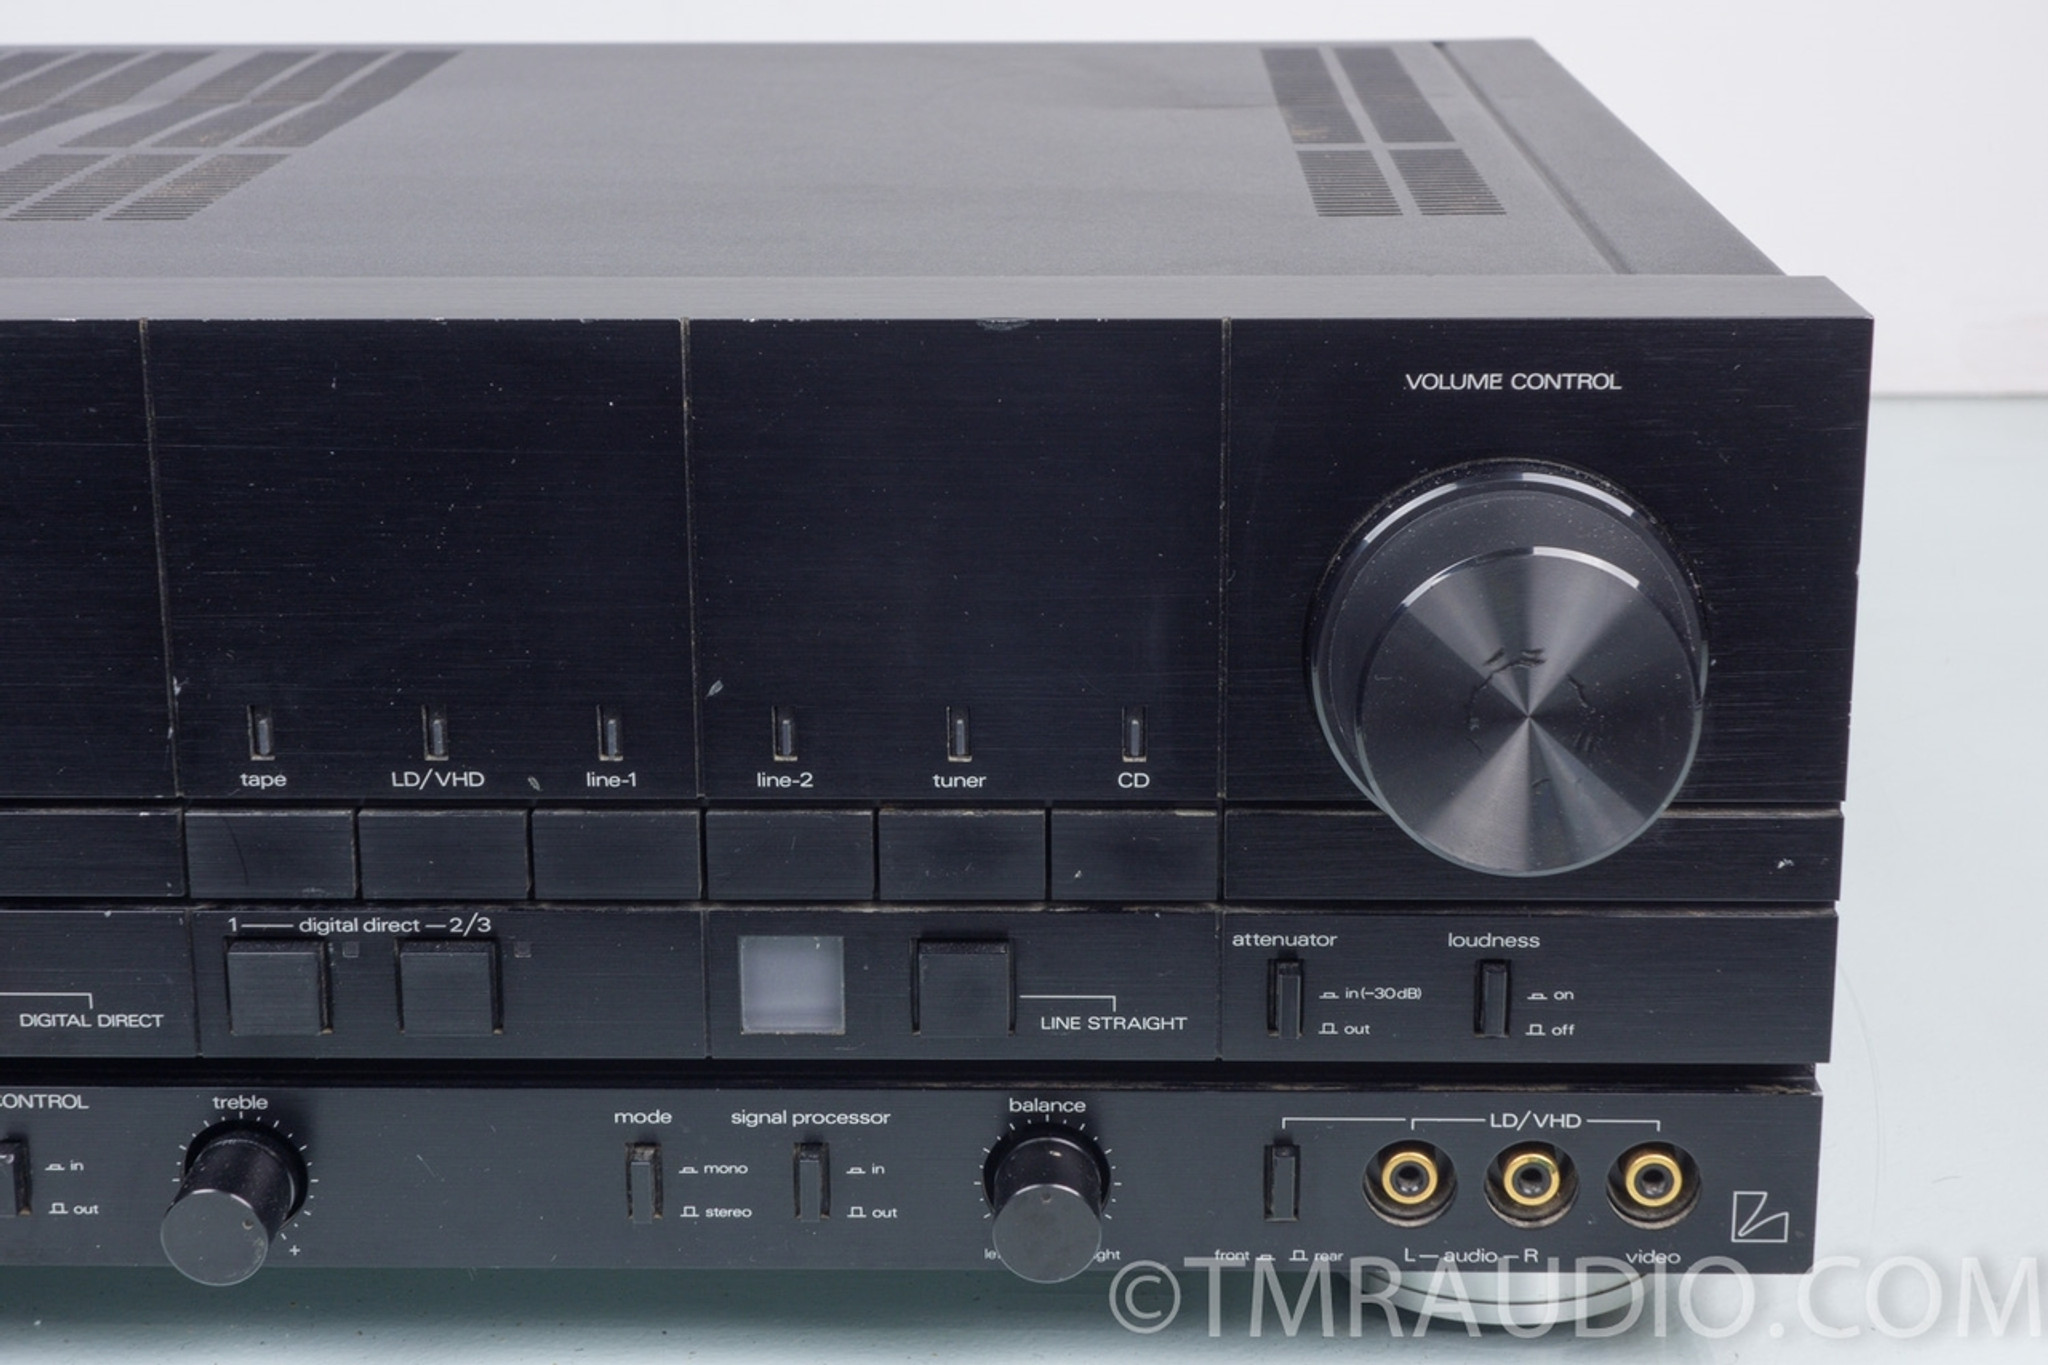 Luxman LV-117 Integrated Amplifier - Further Price Reduction to $320.00 -  SOLD! - Thanks, Joe! Photo #1235522 - US Audio Mart